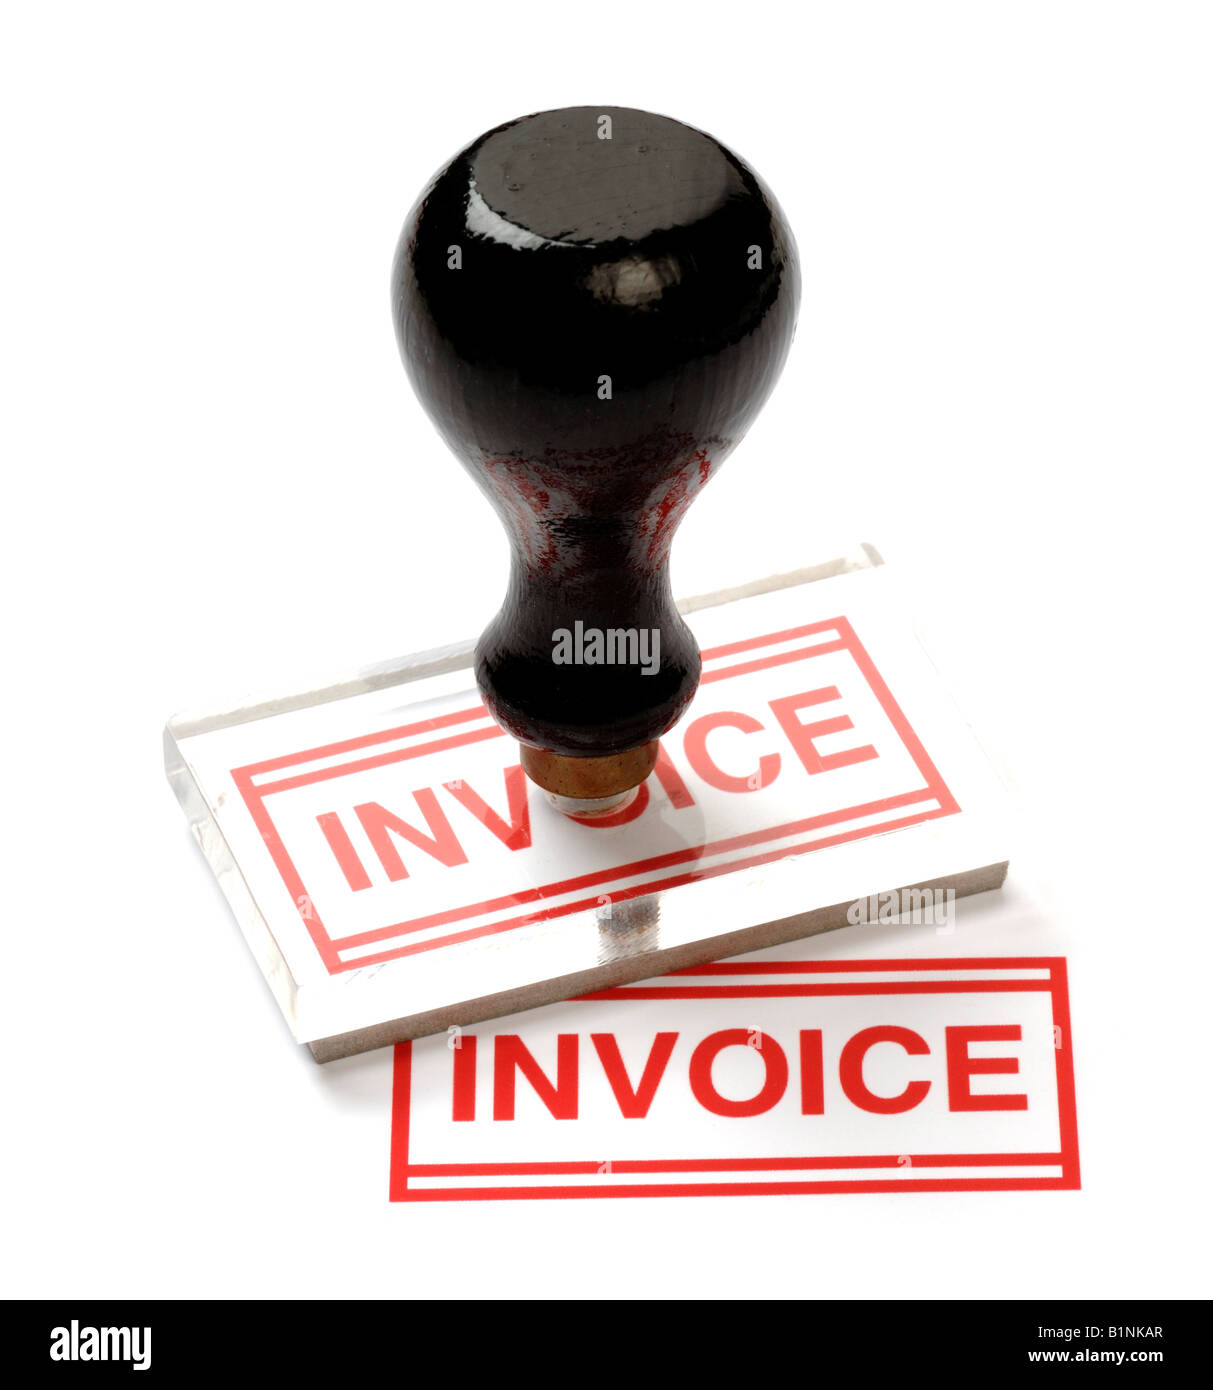 Invoice office rubber stamp Stock Photo